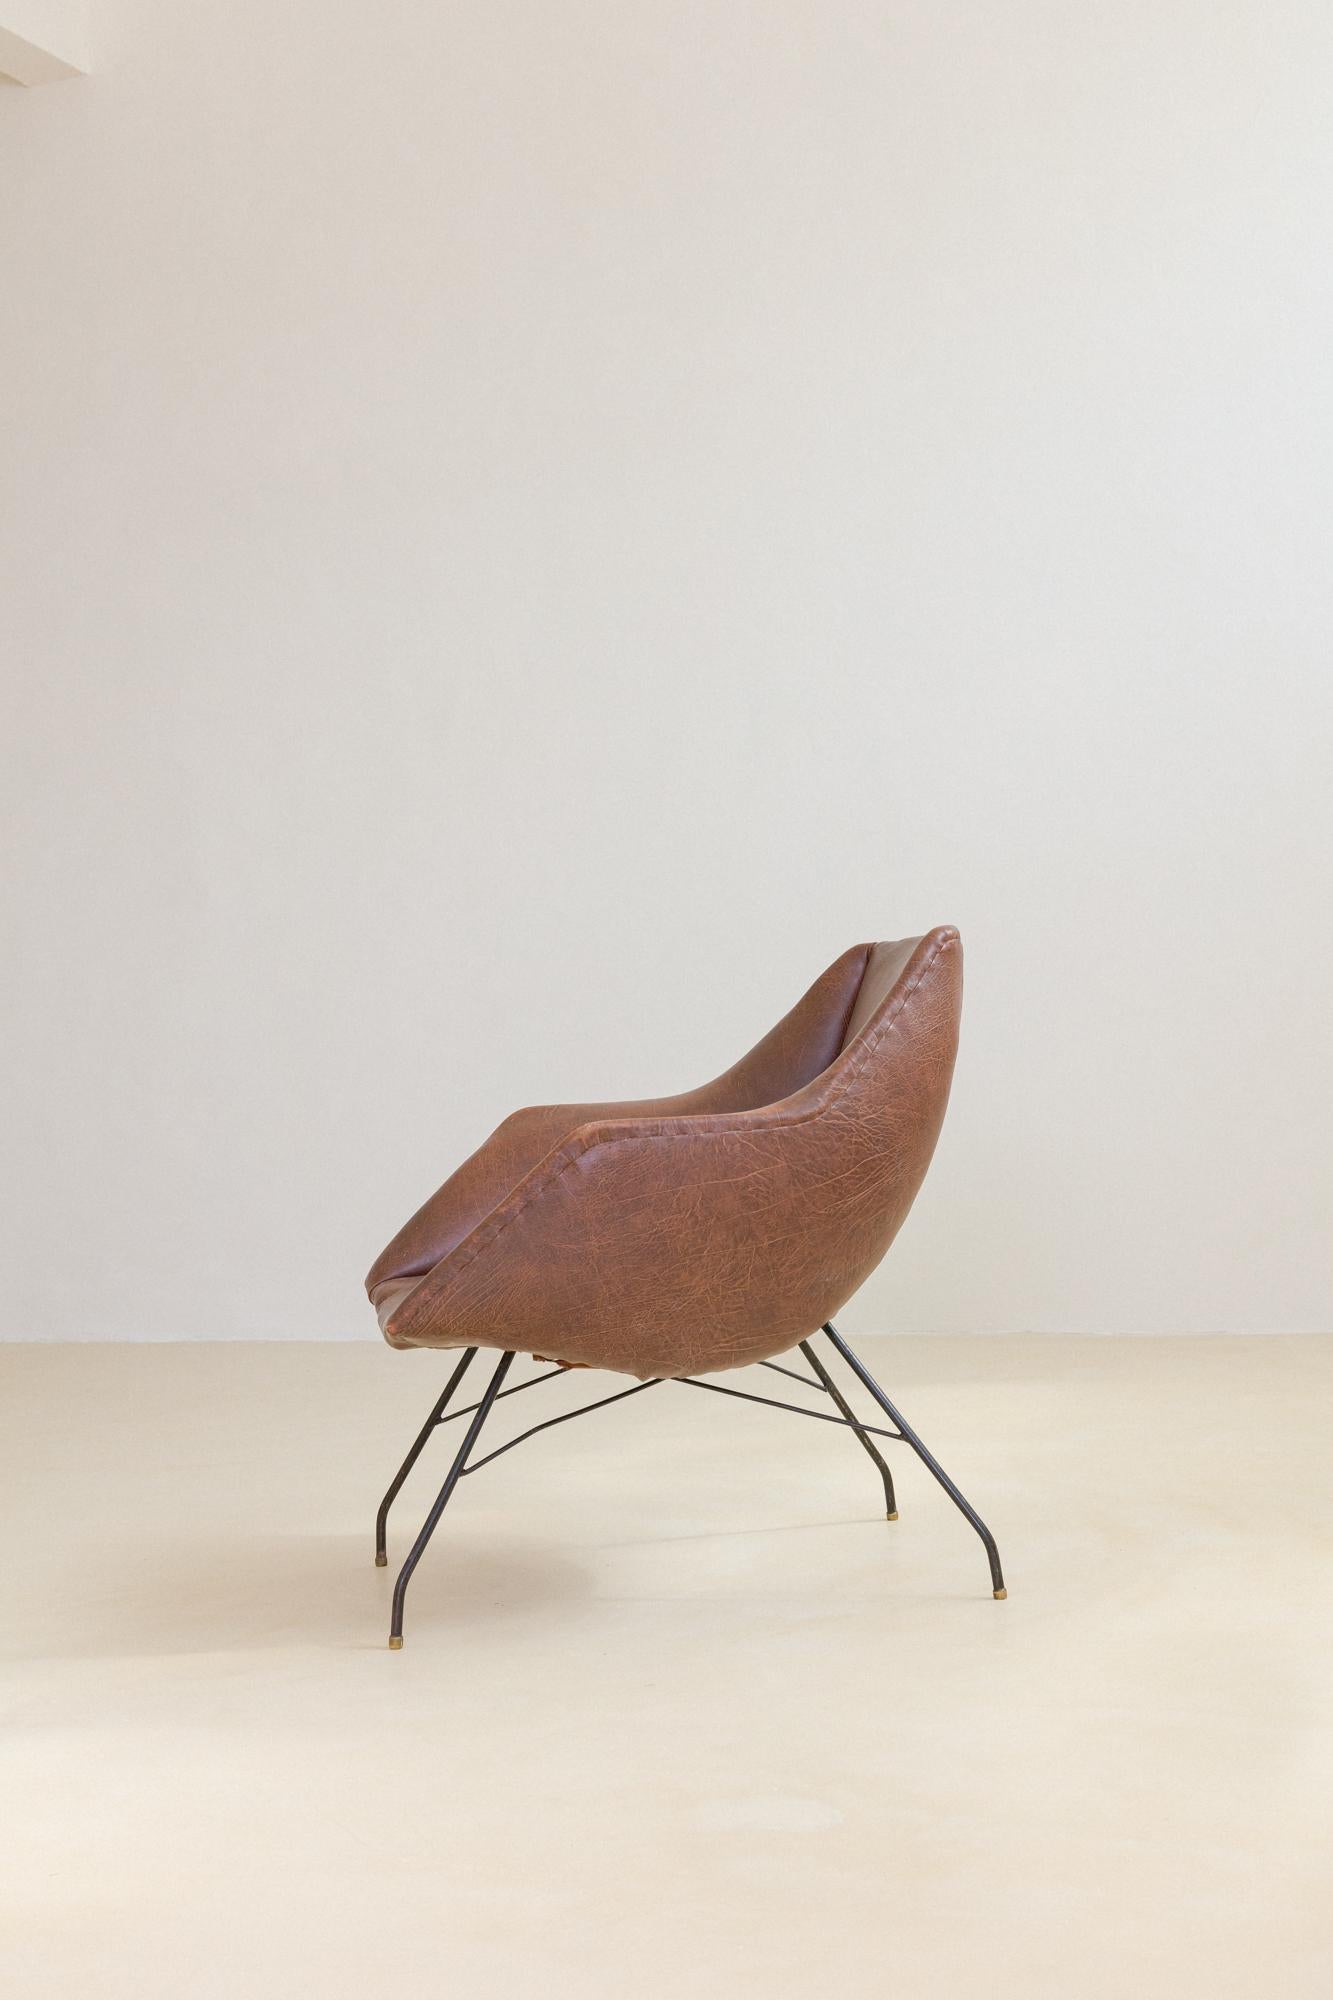 Iron Pair of Concha Chairs by Carlo Hauner and Martin Eisler, 1953, Brazilian Design For Sale